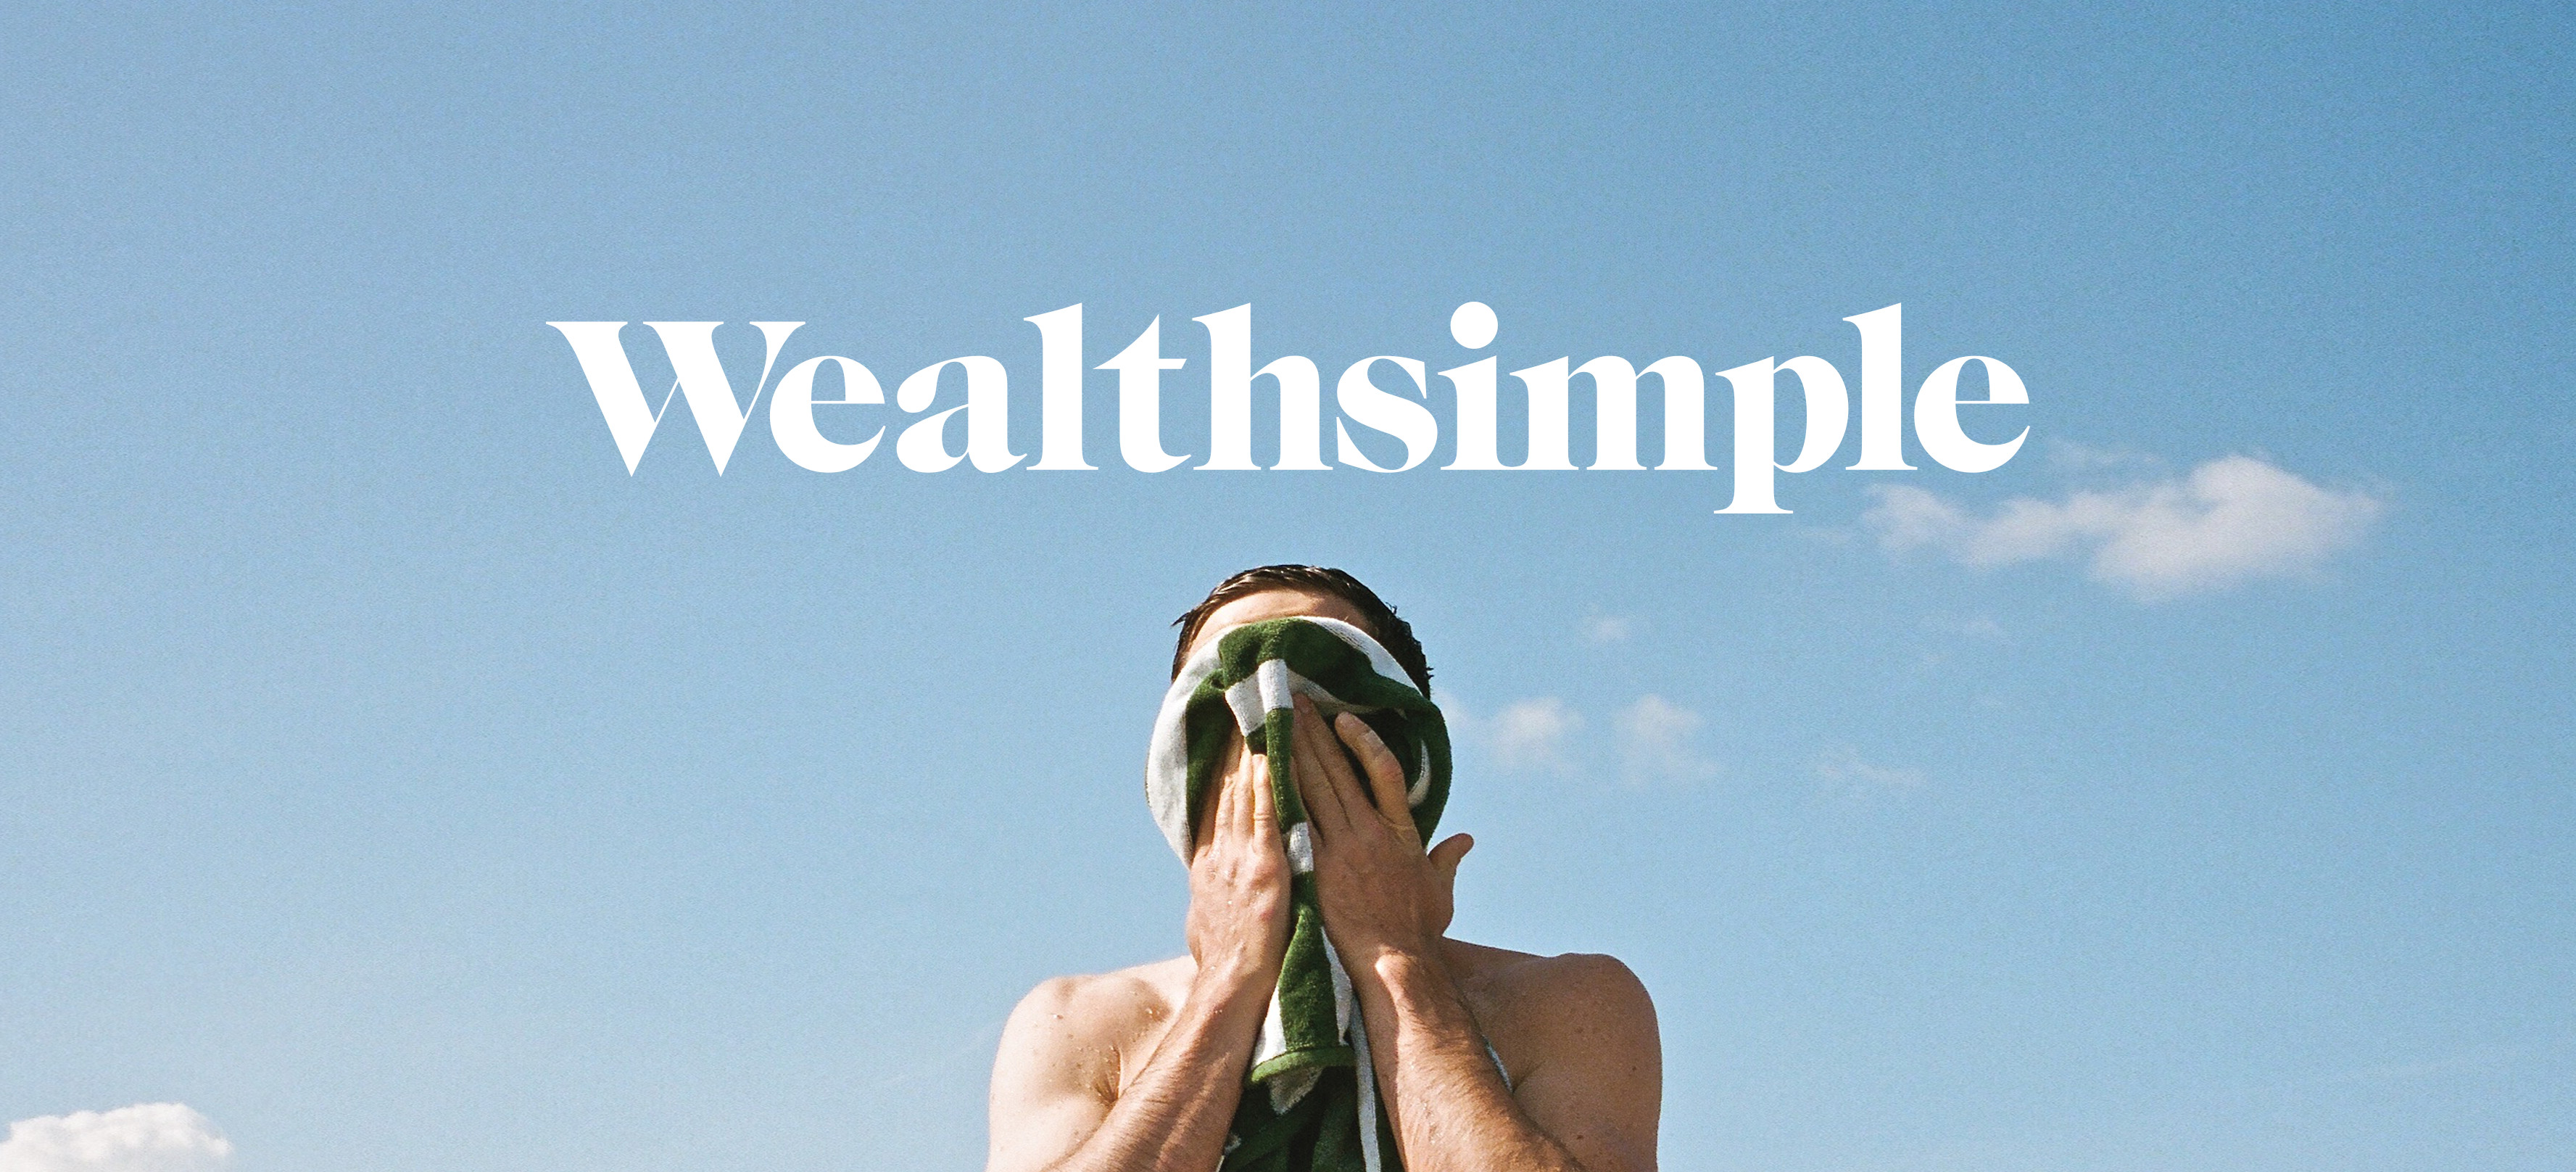 Wealthsimple Stock Market Investing Review 2020